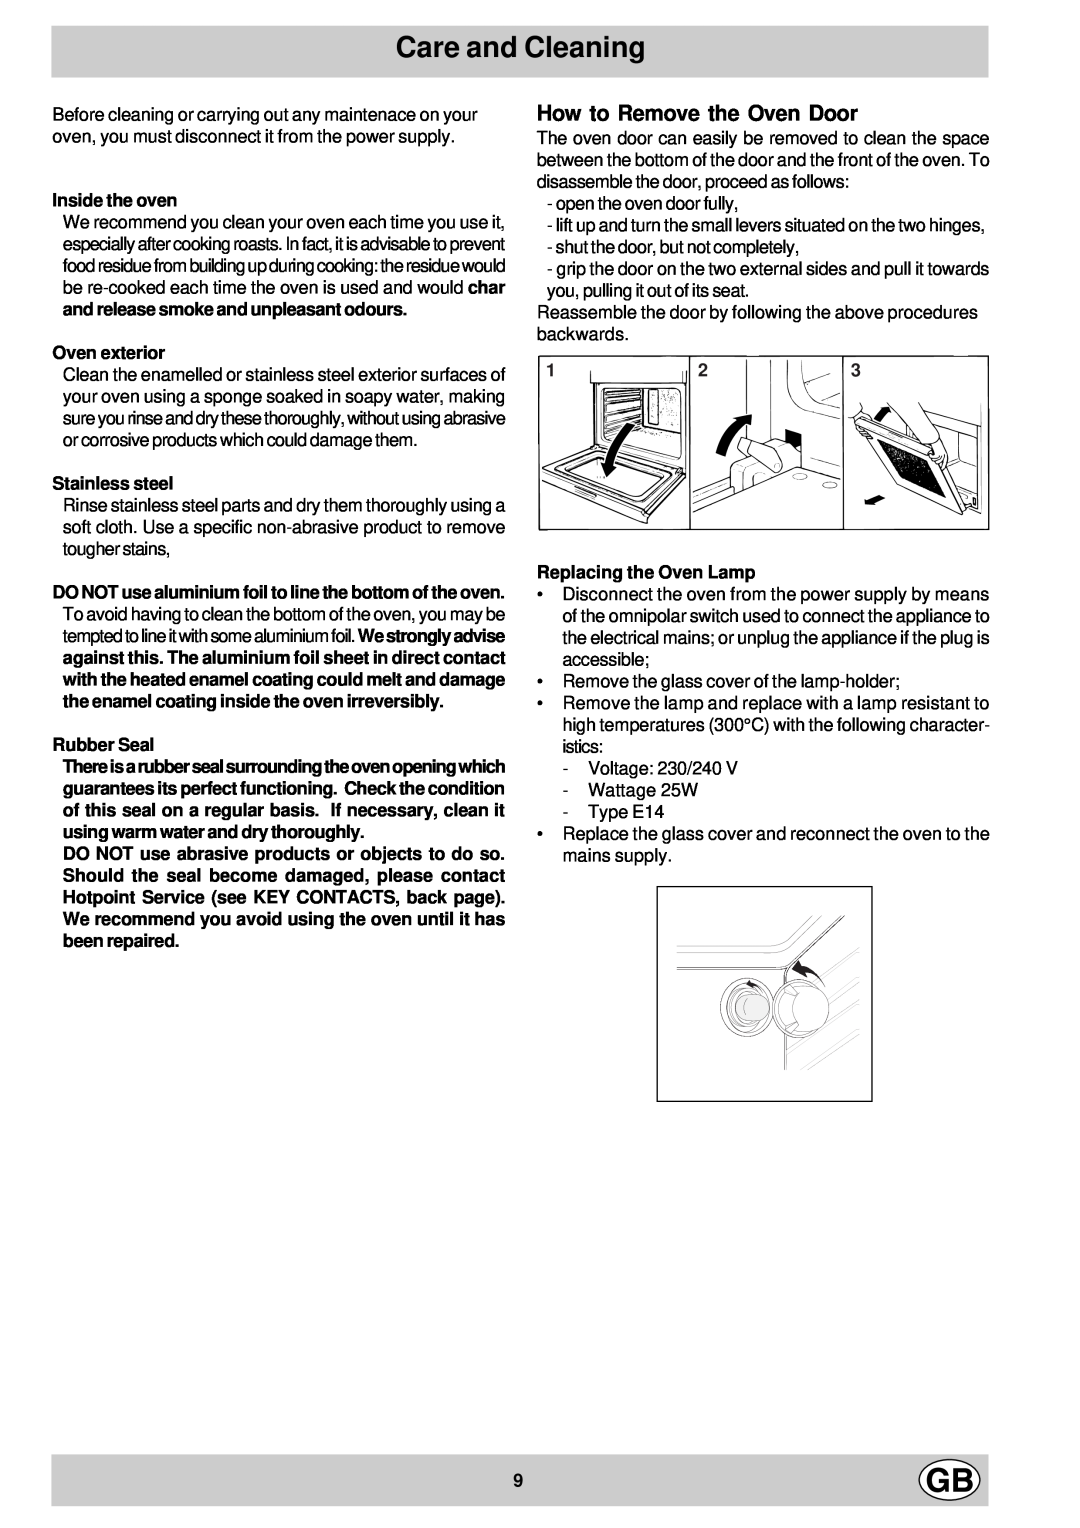 Hotpoint SY11 manual Care and Cleaning, How to Remove the Oven Door 